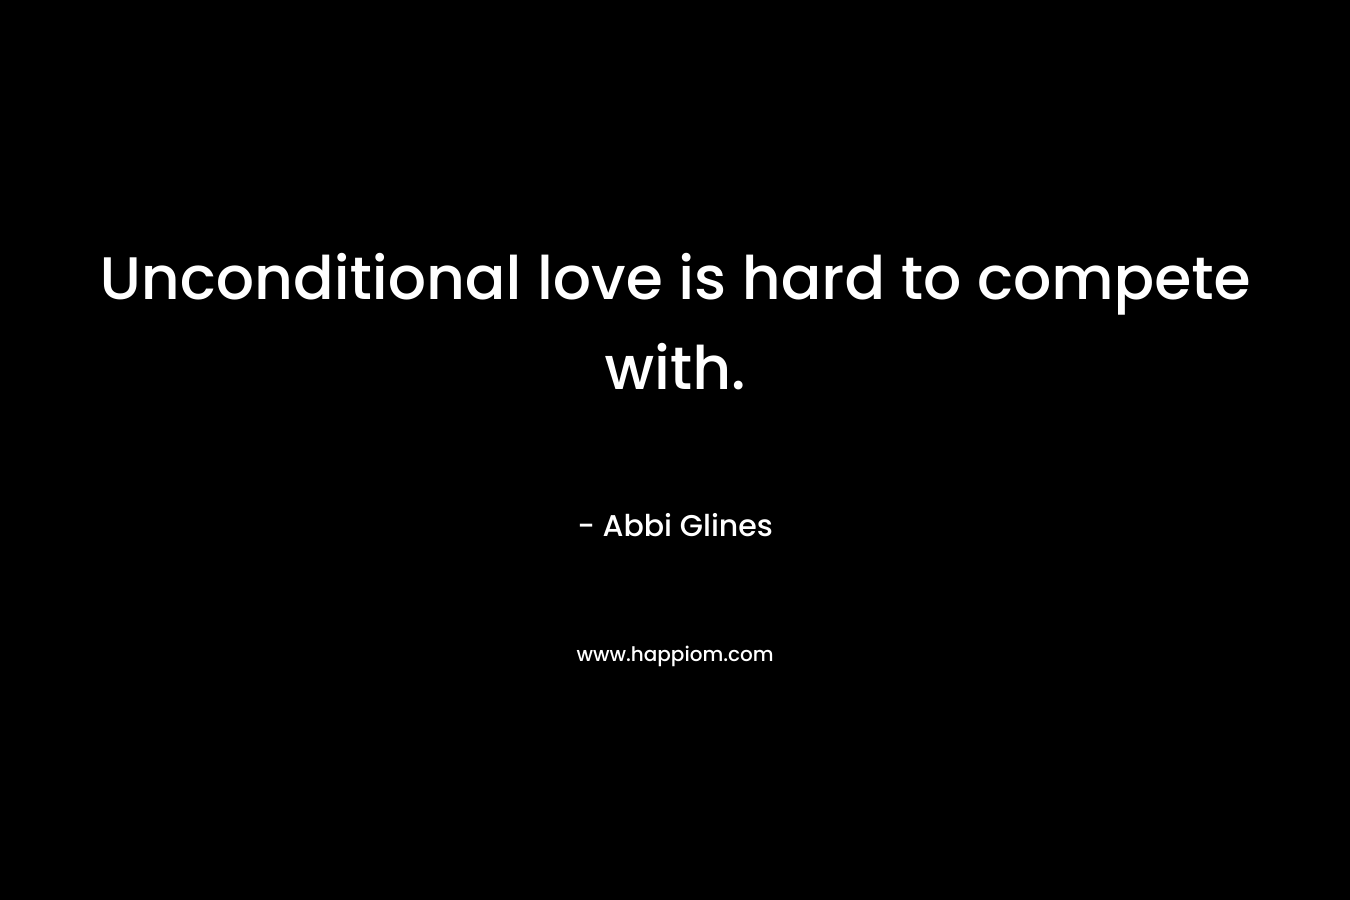 Unconditional love is hard to compete with. – Abbi Glines